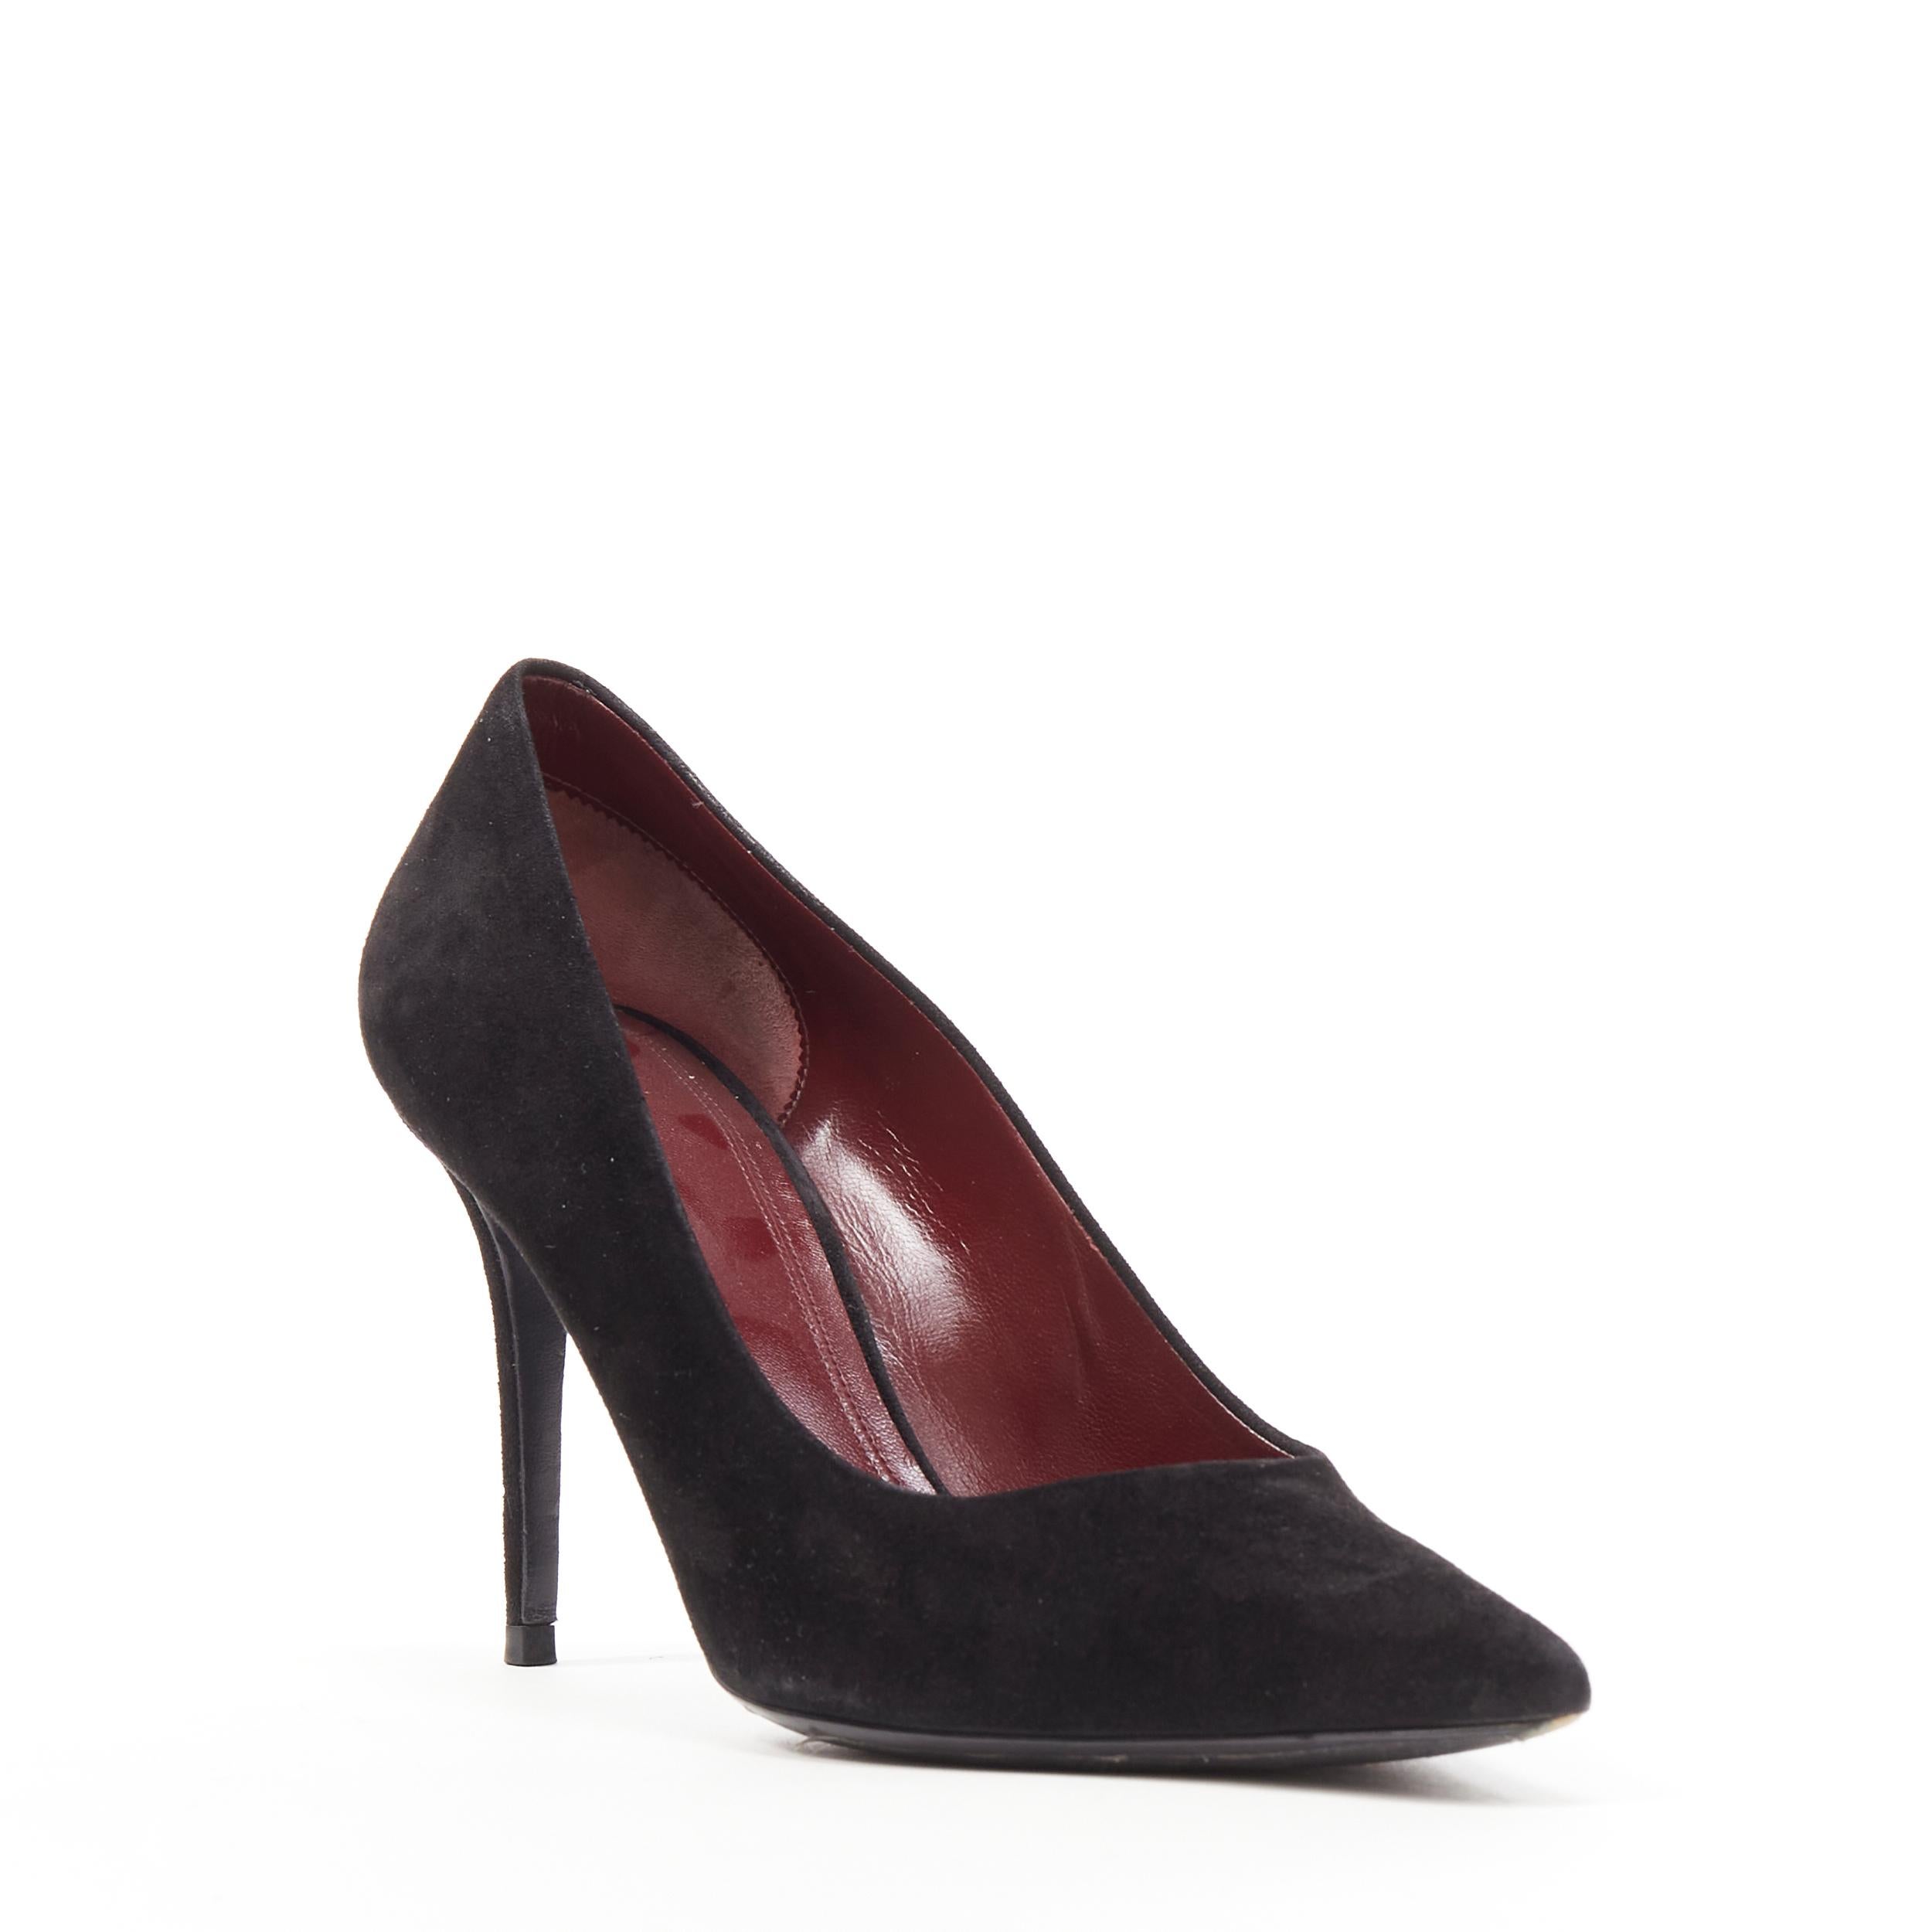 OLD CELINE PHOEBE PHILO black suede leather point tie pigalle stiletto pump EU38 
Reference: AEMA/A00013 
Brand: Celine 
Designer: Phoebe Philo 
Model: Suede pump 
Material: Suede 
Color: Black 
Pattern: Solid 
Extra Detail: Black suede. Pointed